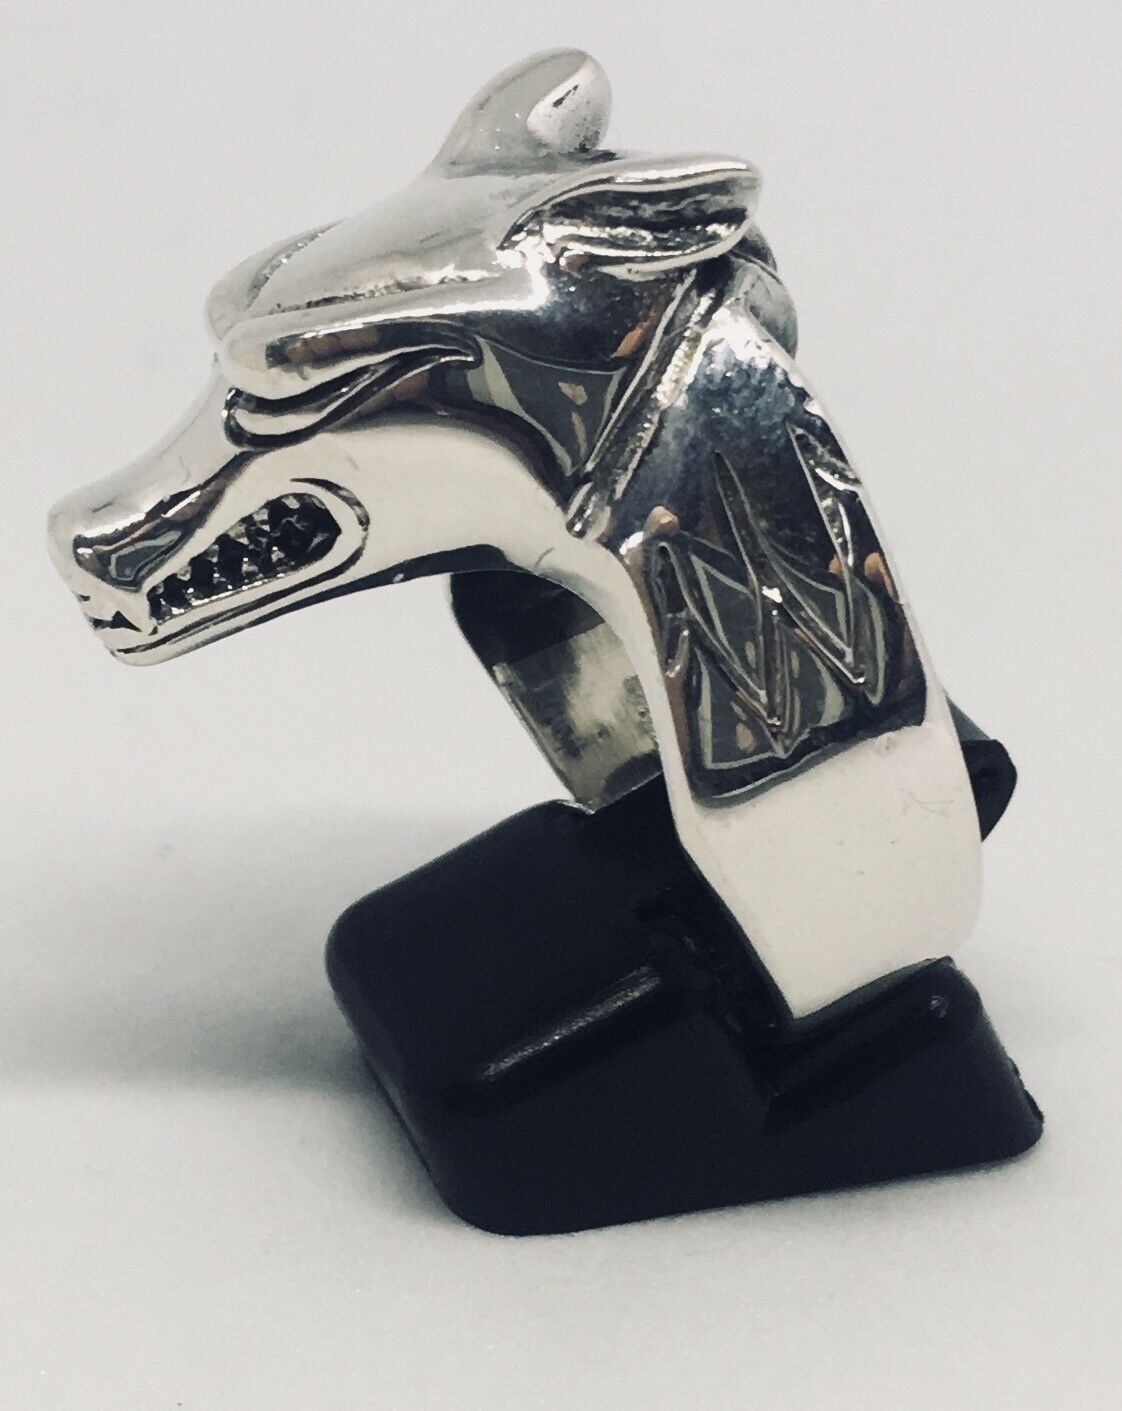 Anubis Egyptian Hound Ring - .925 sterling silver